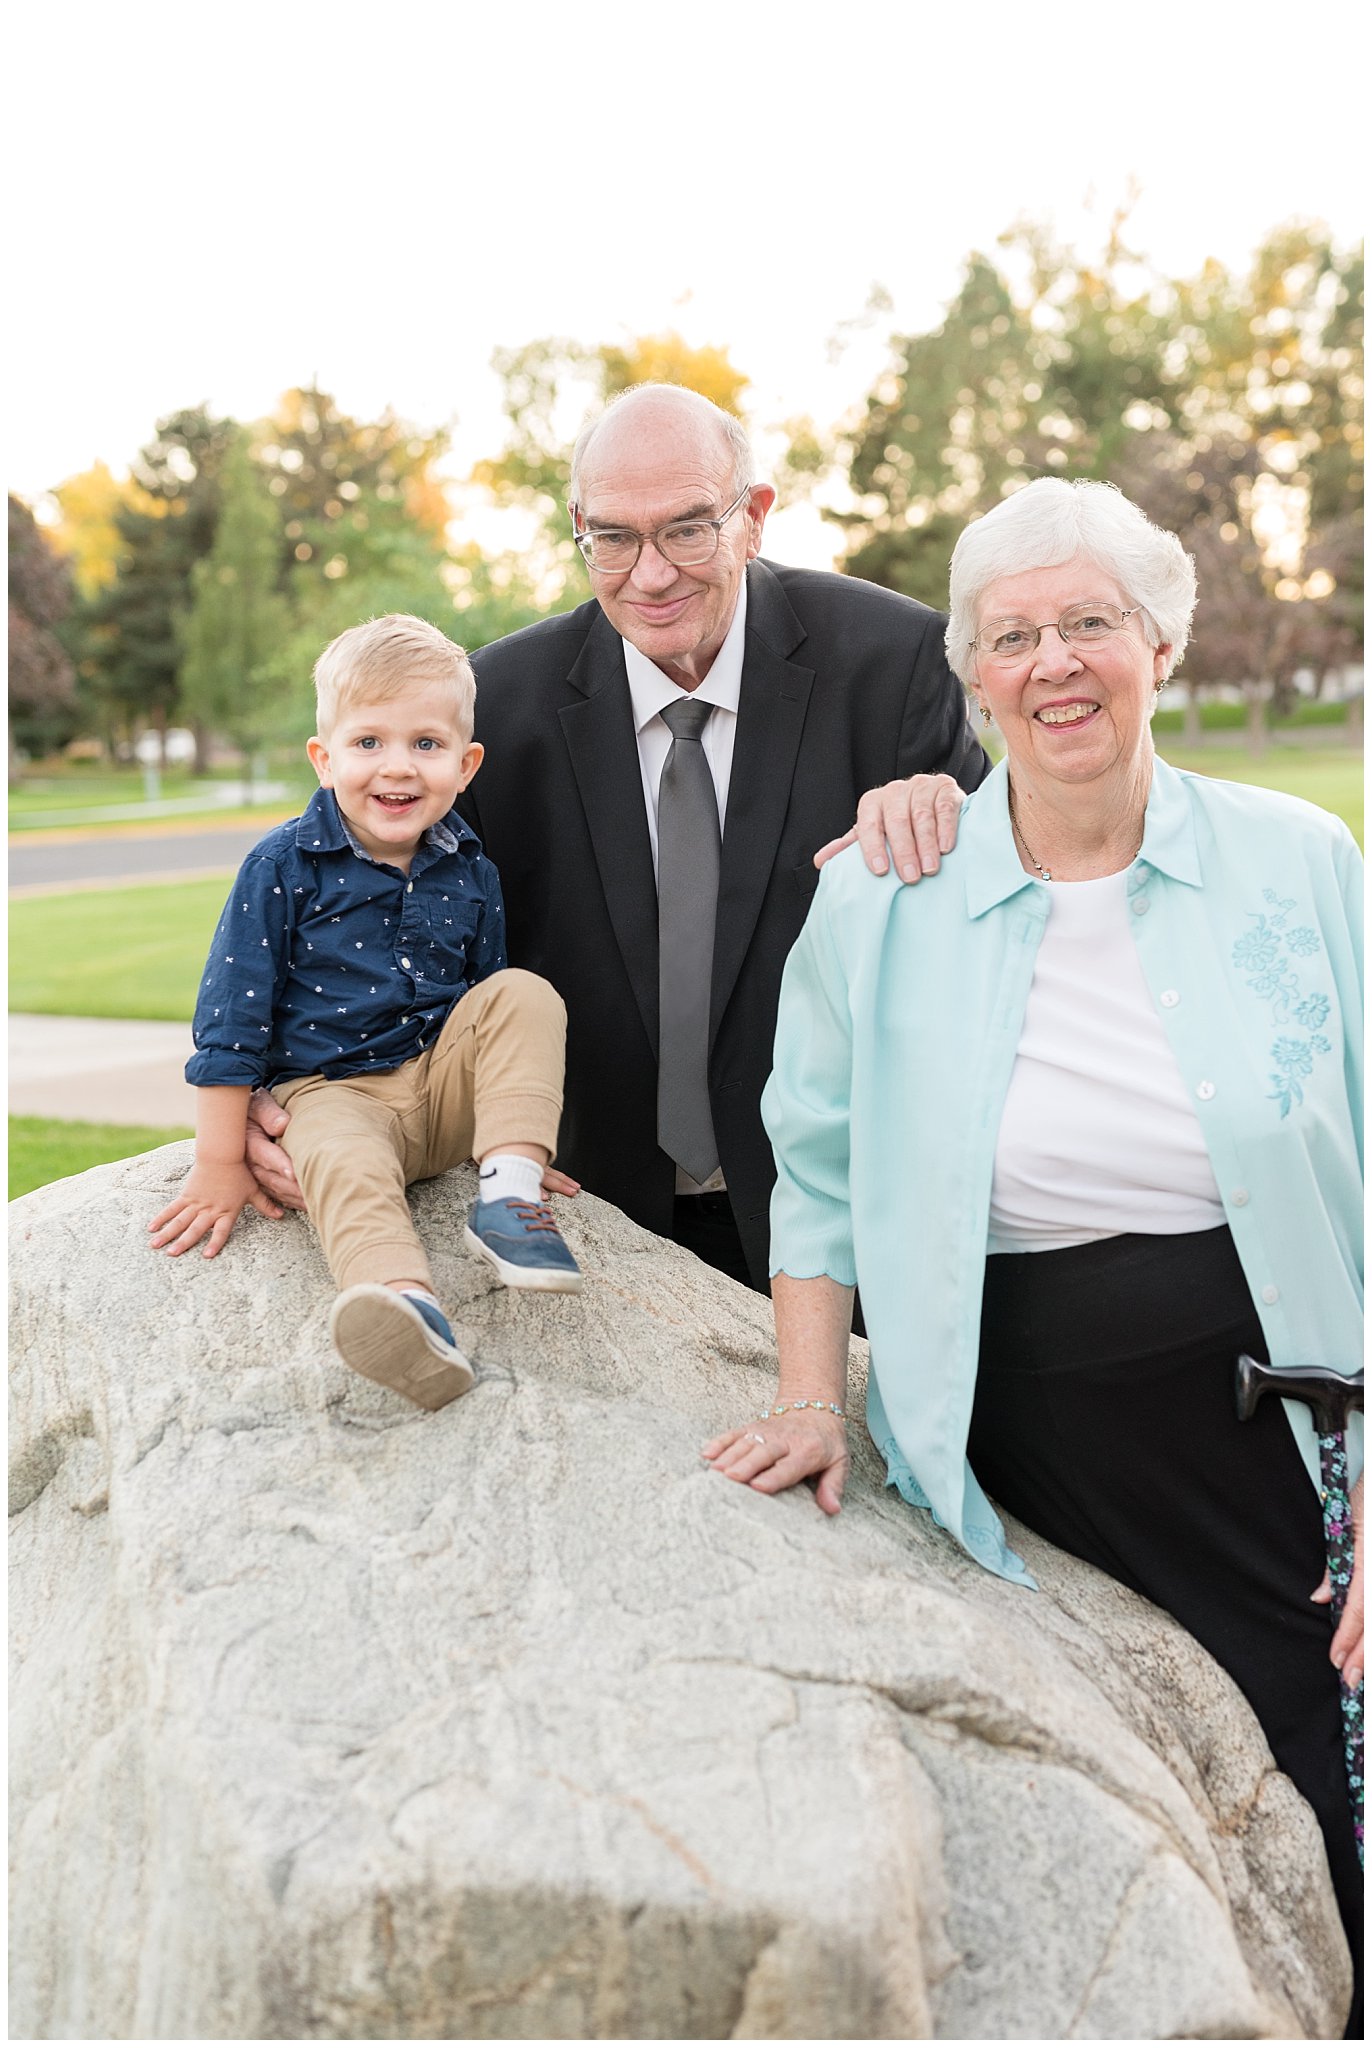 Liam with grandparents at the park | Layton Commons Park | Layton Couples Photographer | Jessie and Dallin